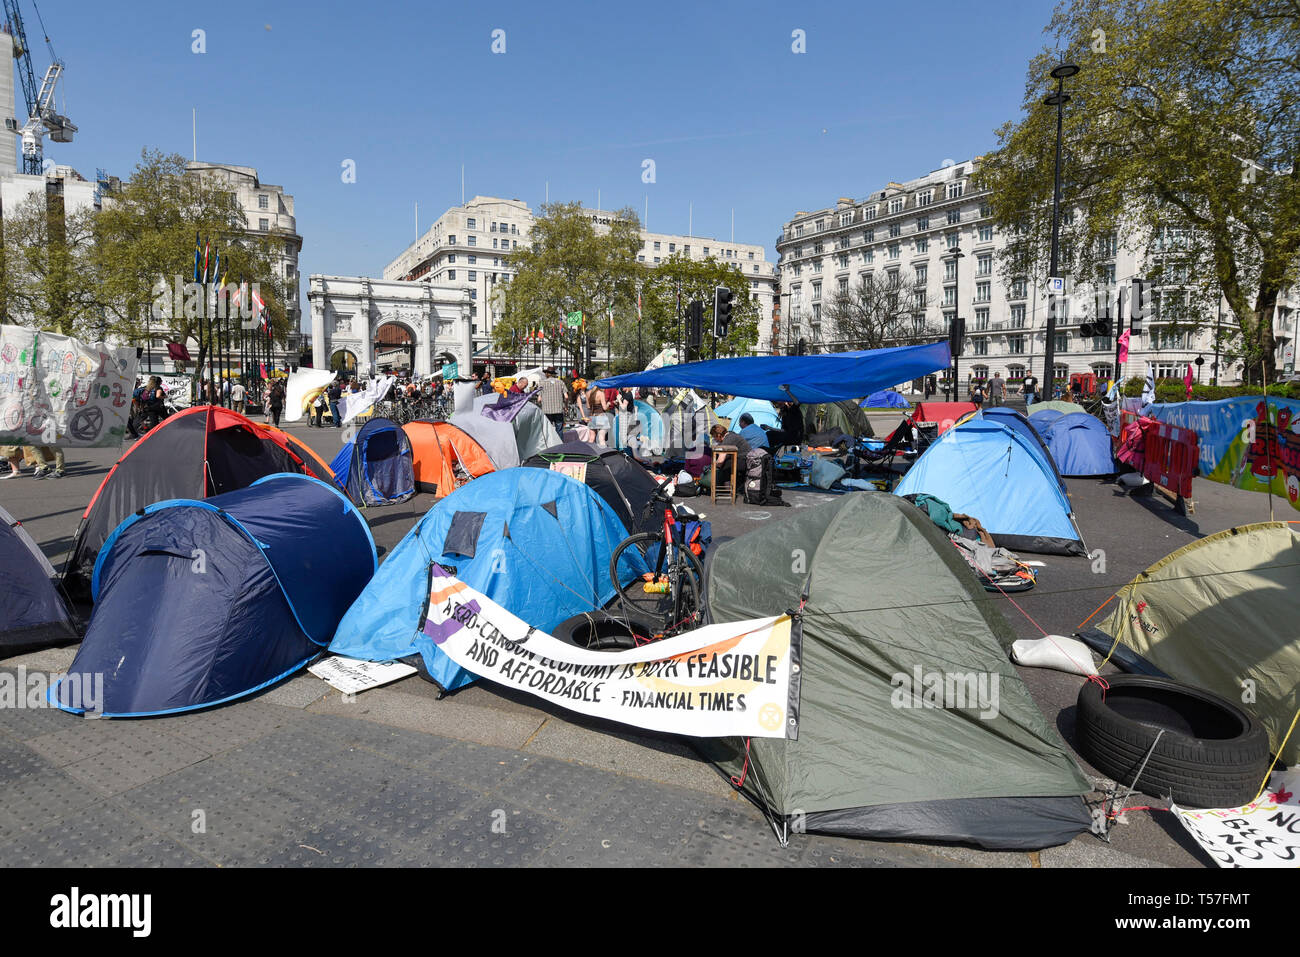 London, UK.  22 April 2019.  Activists' tents at Marble Arch during 'London: International Rebellion', on day eight of a protest organised by Extinction Rebellion.  Protesters are demanding that governments take action against climate change.  After police issued section 14 orders at the other protest sites of Oxford Circus, Waterloo Bridge and Parliament Square resulting in over 900 arrests, protesters have convened at the designated site of Marble Arch so that the protest can continue into its second week.  Credit: Stephen Chung / Alamy Live News Stock Photo